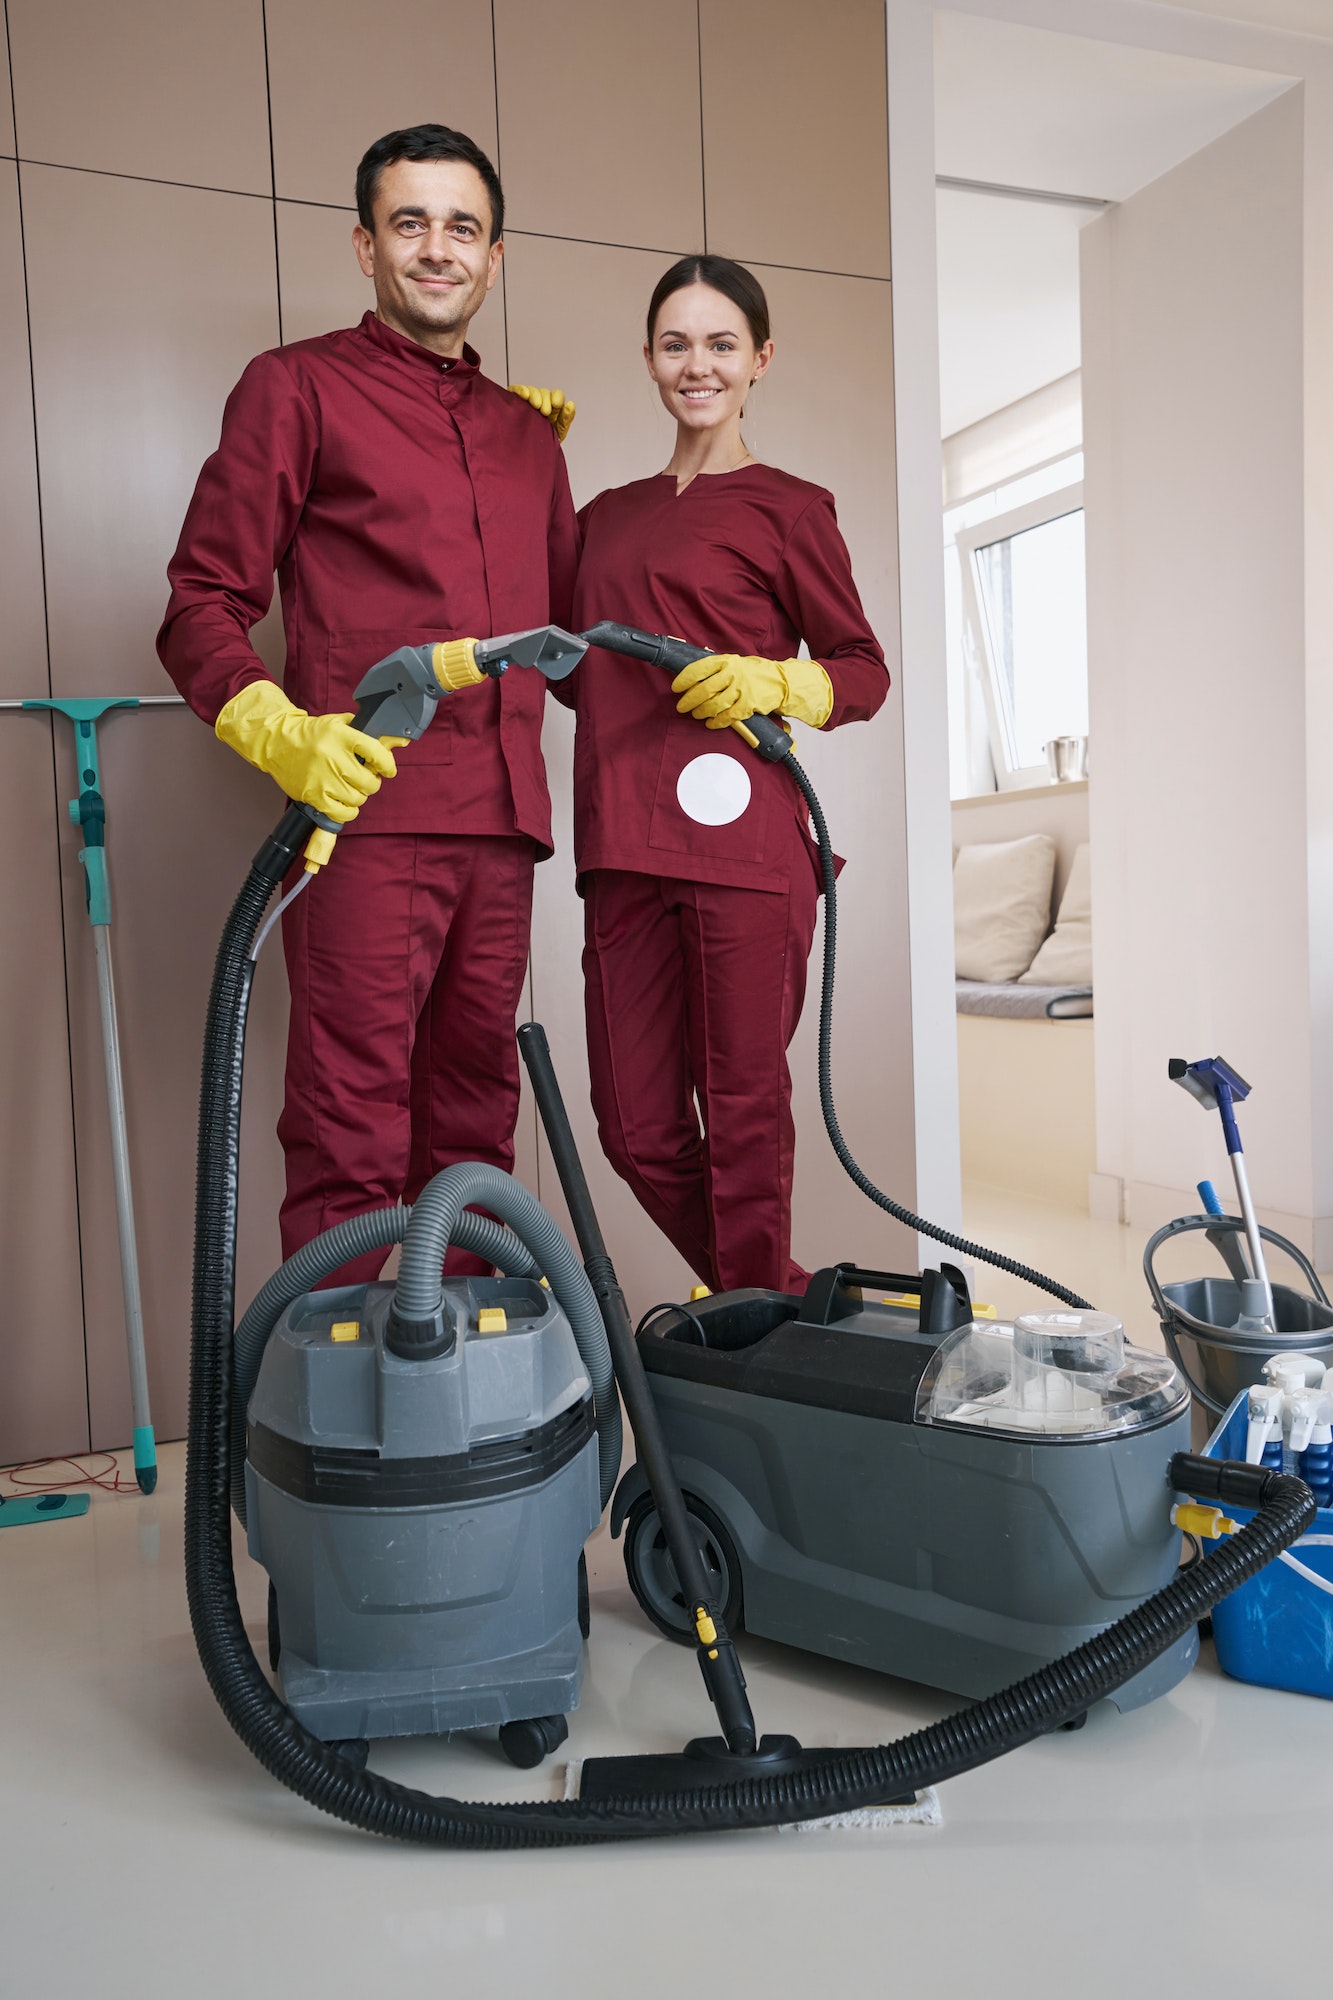 Two workers with cleaning equipment posing for camera